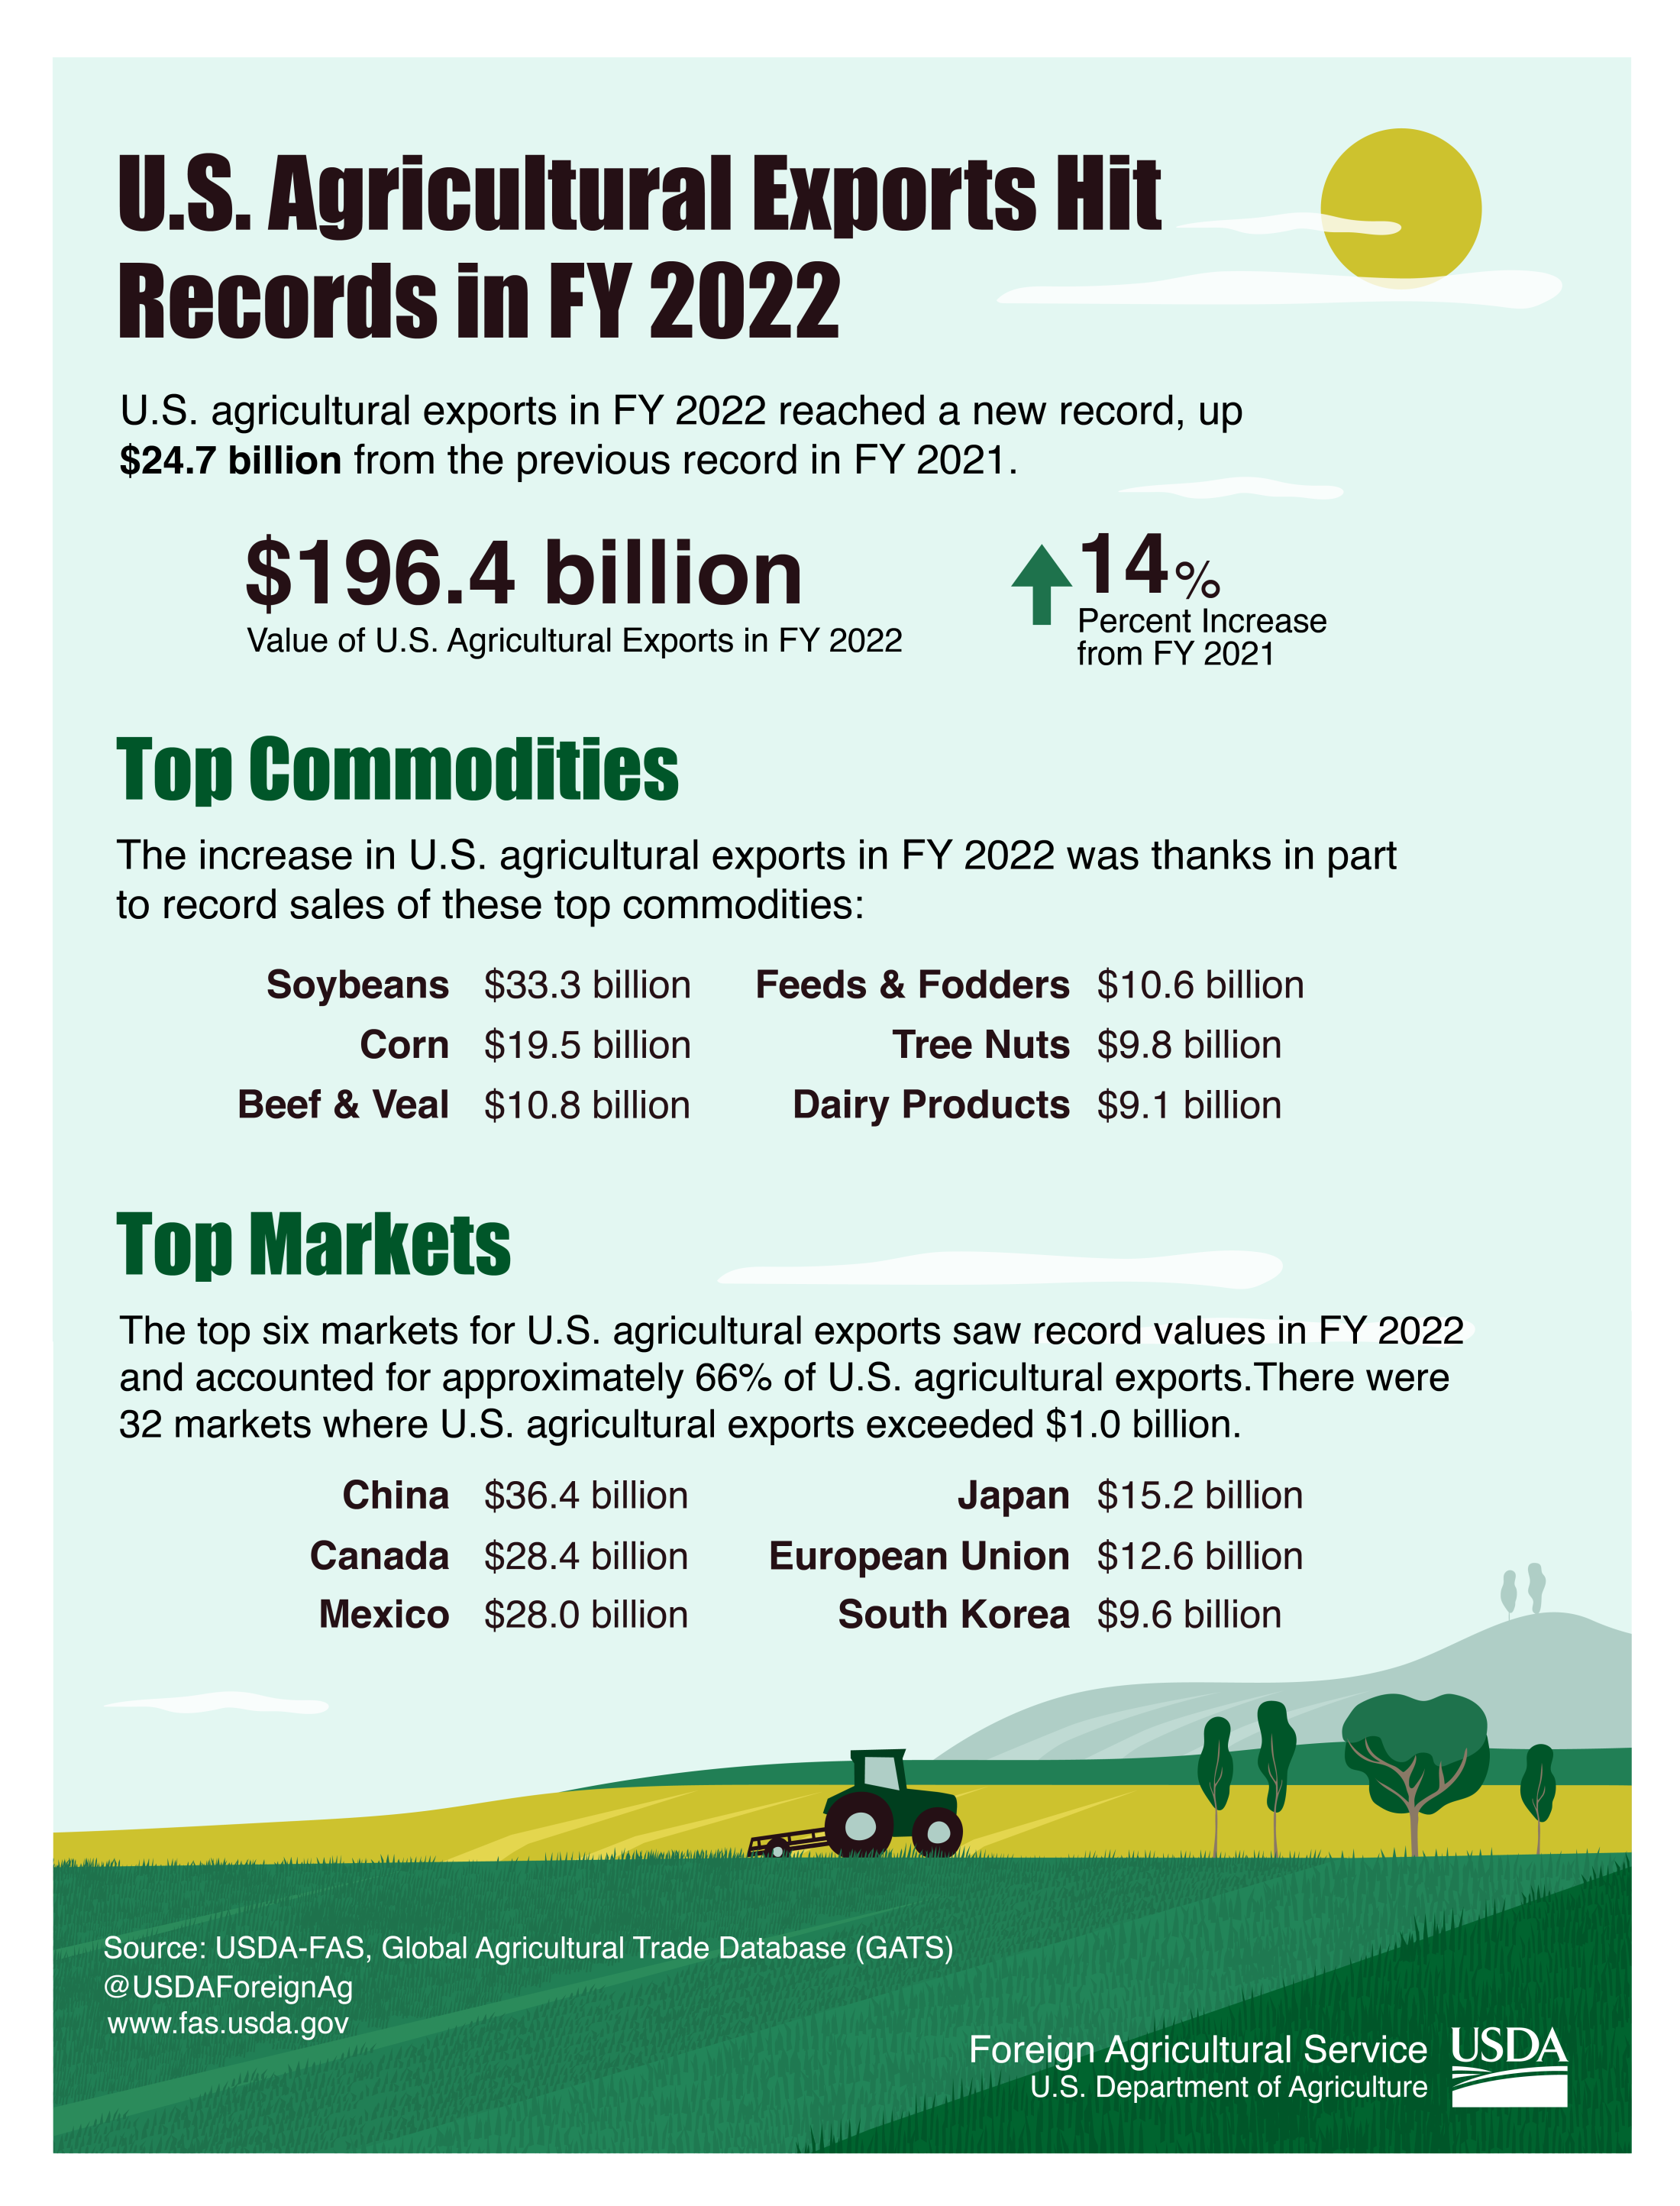 FAS Infographic 2022 Exports